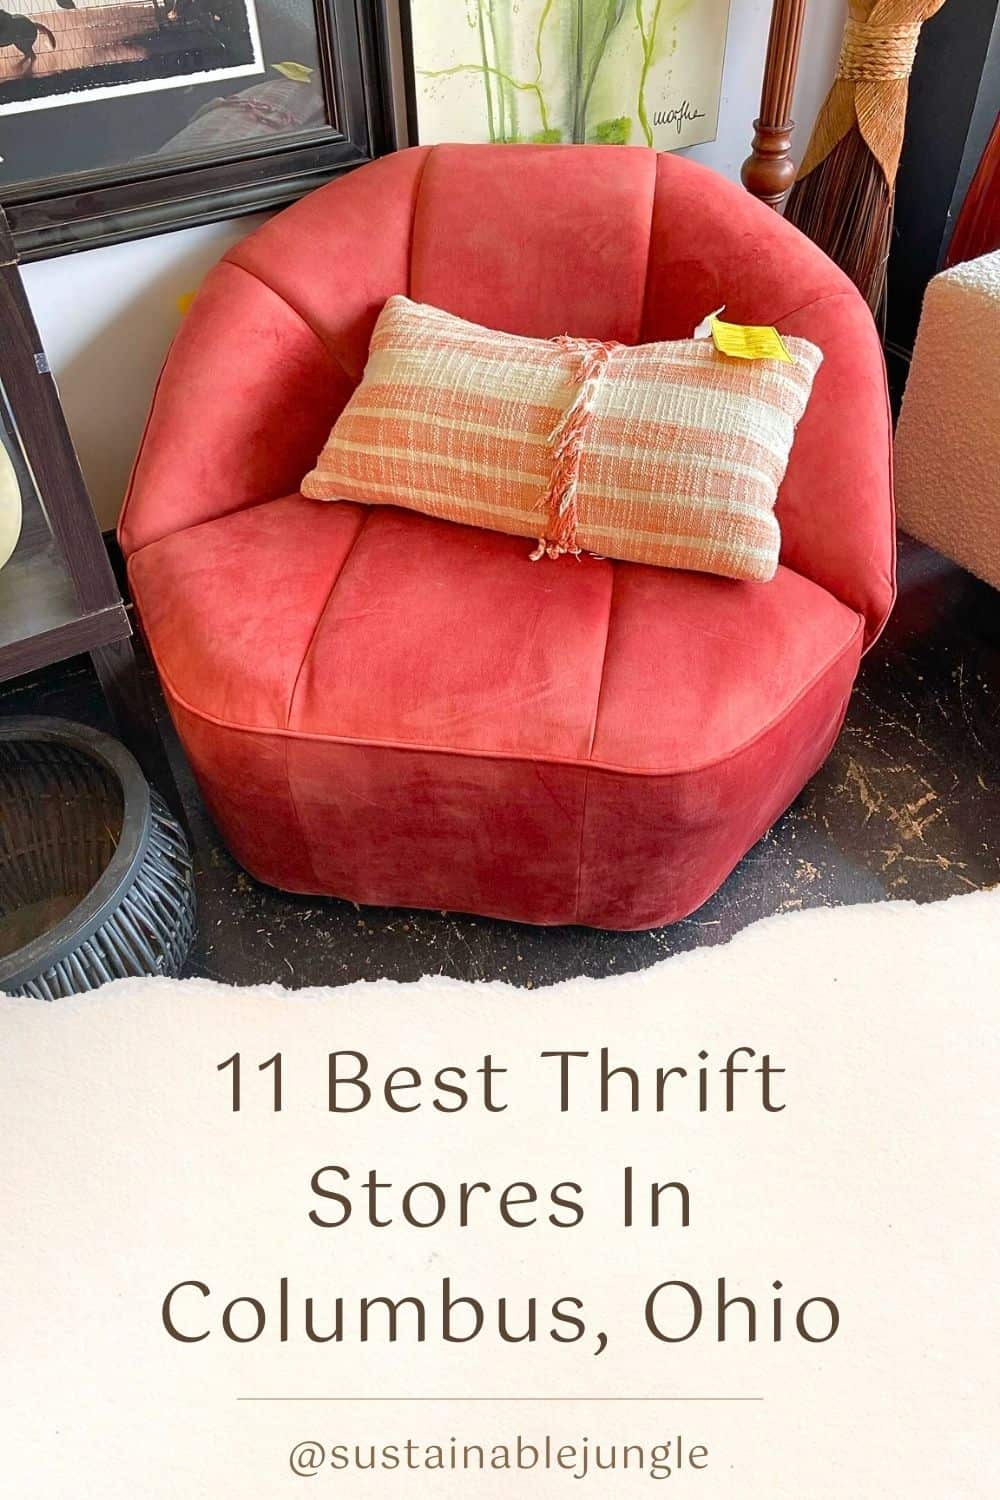 Discovery The 11 Best Thrift Stores In Columbus, Ohio Image by Fresco Furnishings #thriftstorescolumbusohio #bestthriftstoresincolumbus #columbiathriftstores #thriftingcolumbusohio #columbusohiothriftstores #sustainablejungle